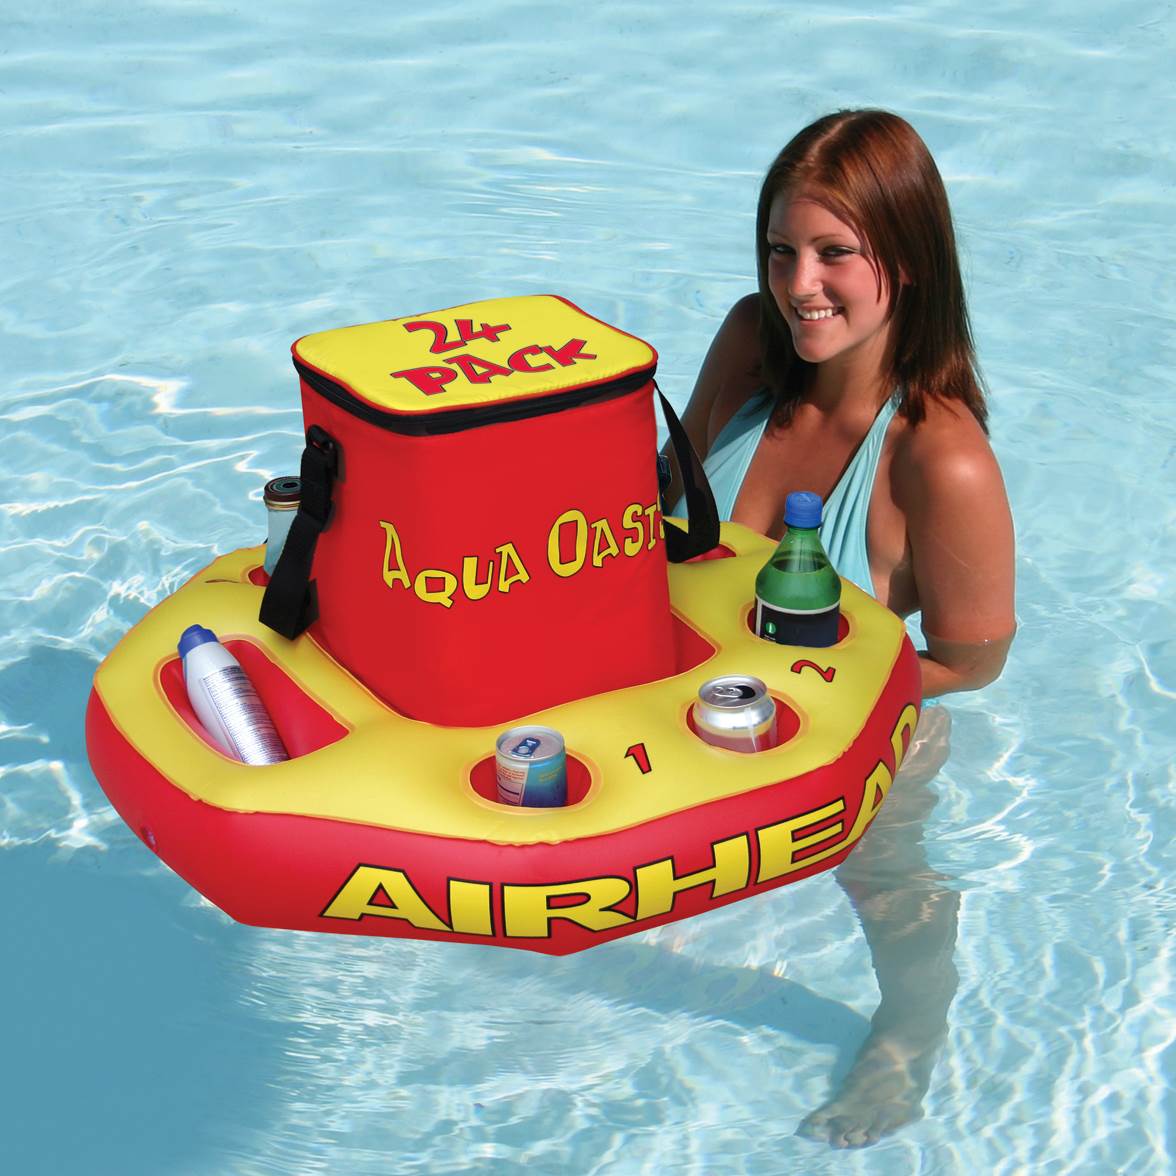 Aqua Oasis Insulated Cooler with Removable Floating Base - image 4 of 5